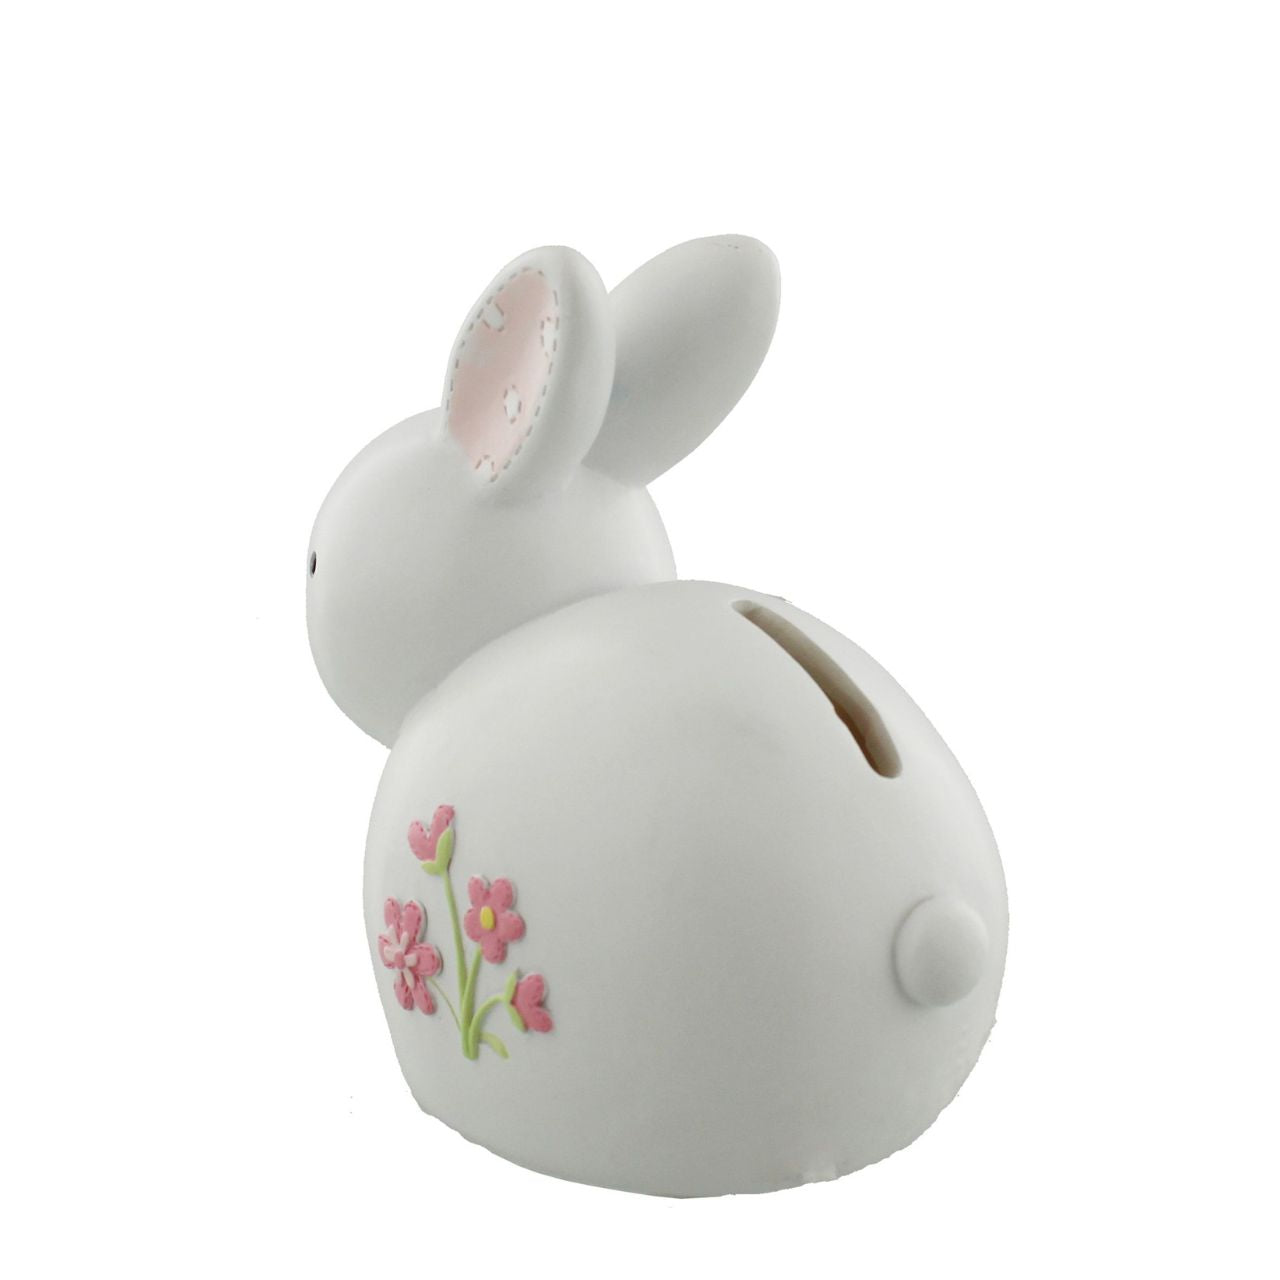 'Petit Cheri' Collection Money Box Pink Rabbit  Help a precious new arrival save for their very first rainy day with this adorable pink and white bunny rabbit money box. From the Petit Cheri Collection by CELEBRATIONS - vintage, rustic and utterly charming gifts for your little darling.